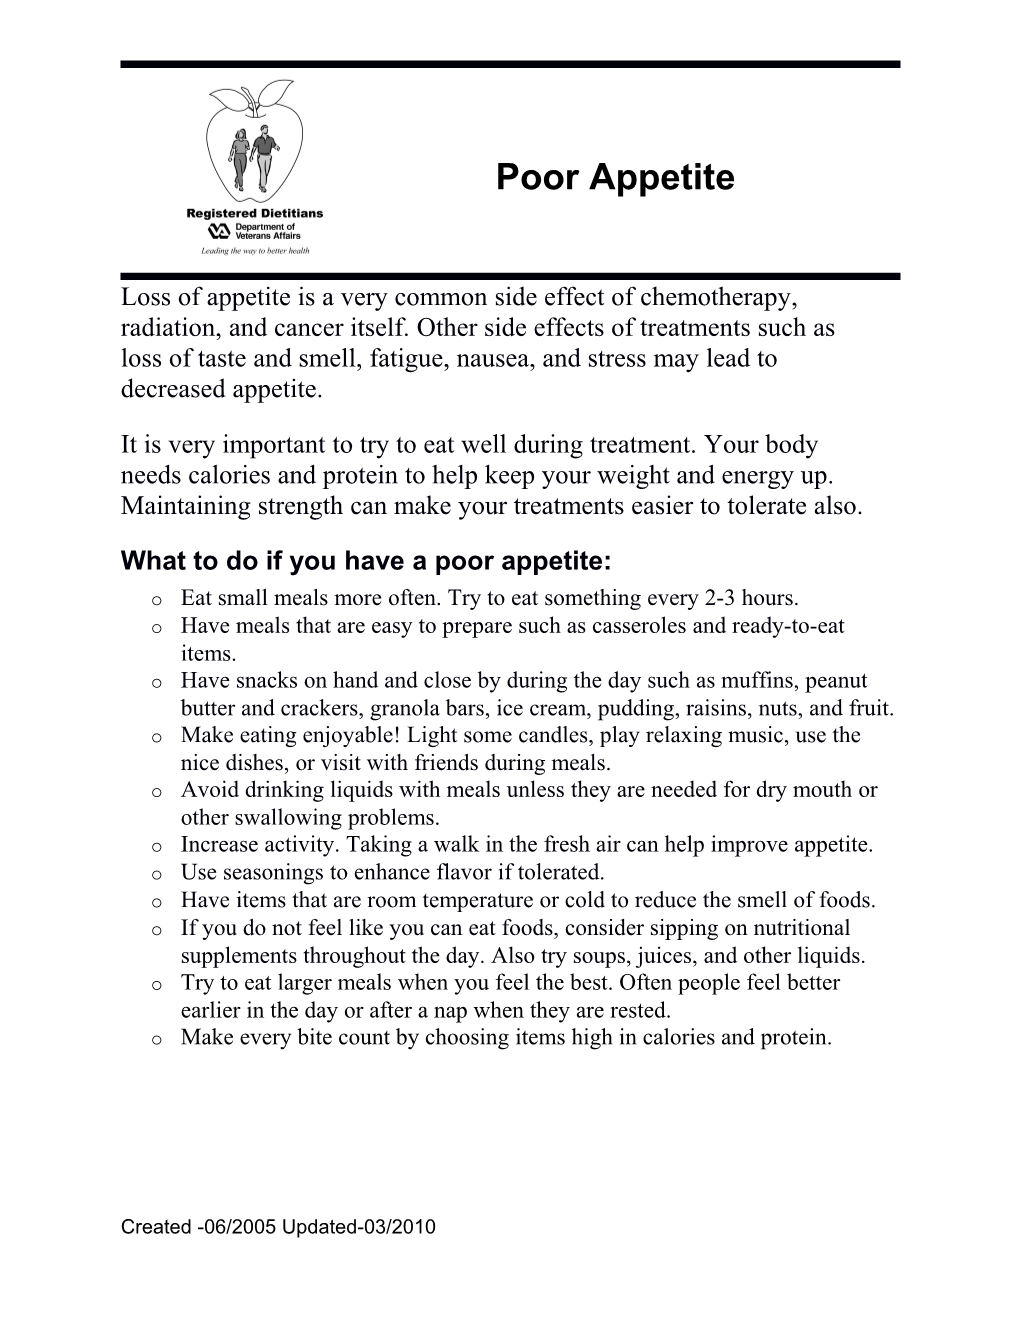 What to Do If You Have a Poor Appetite